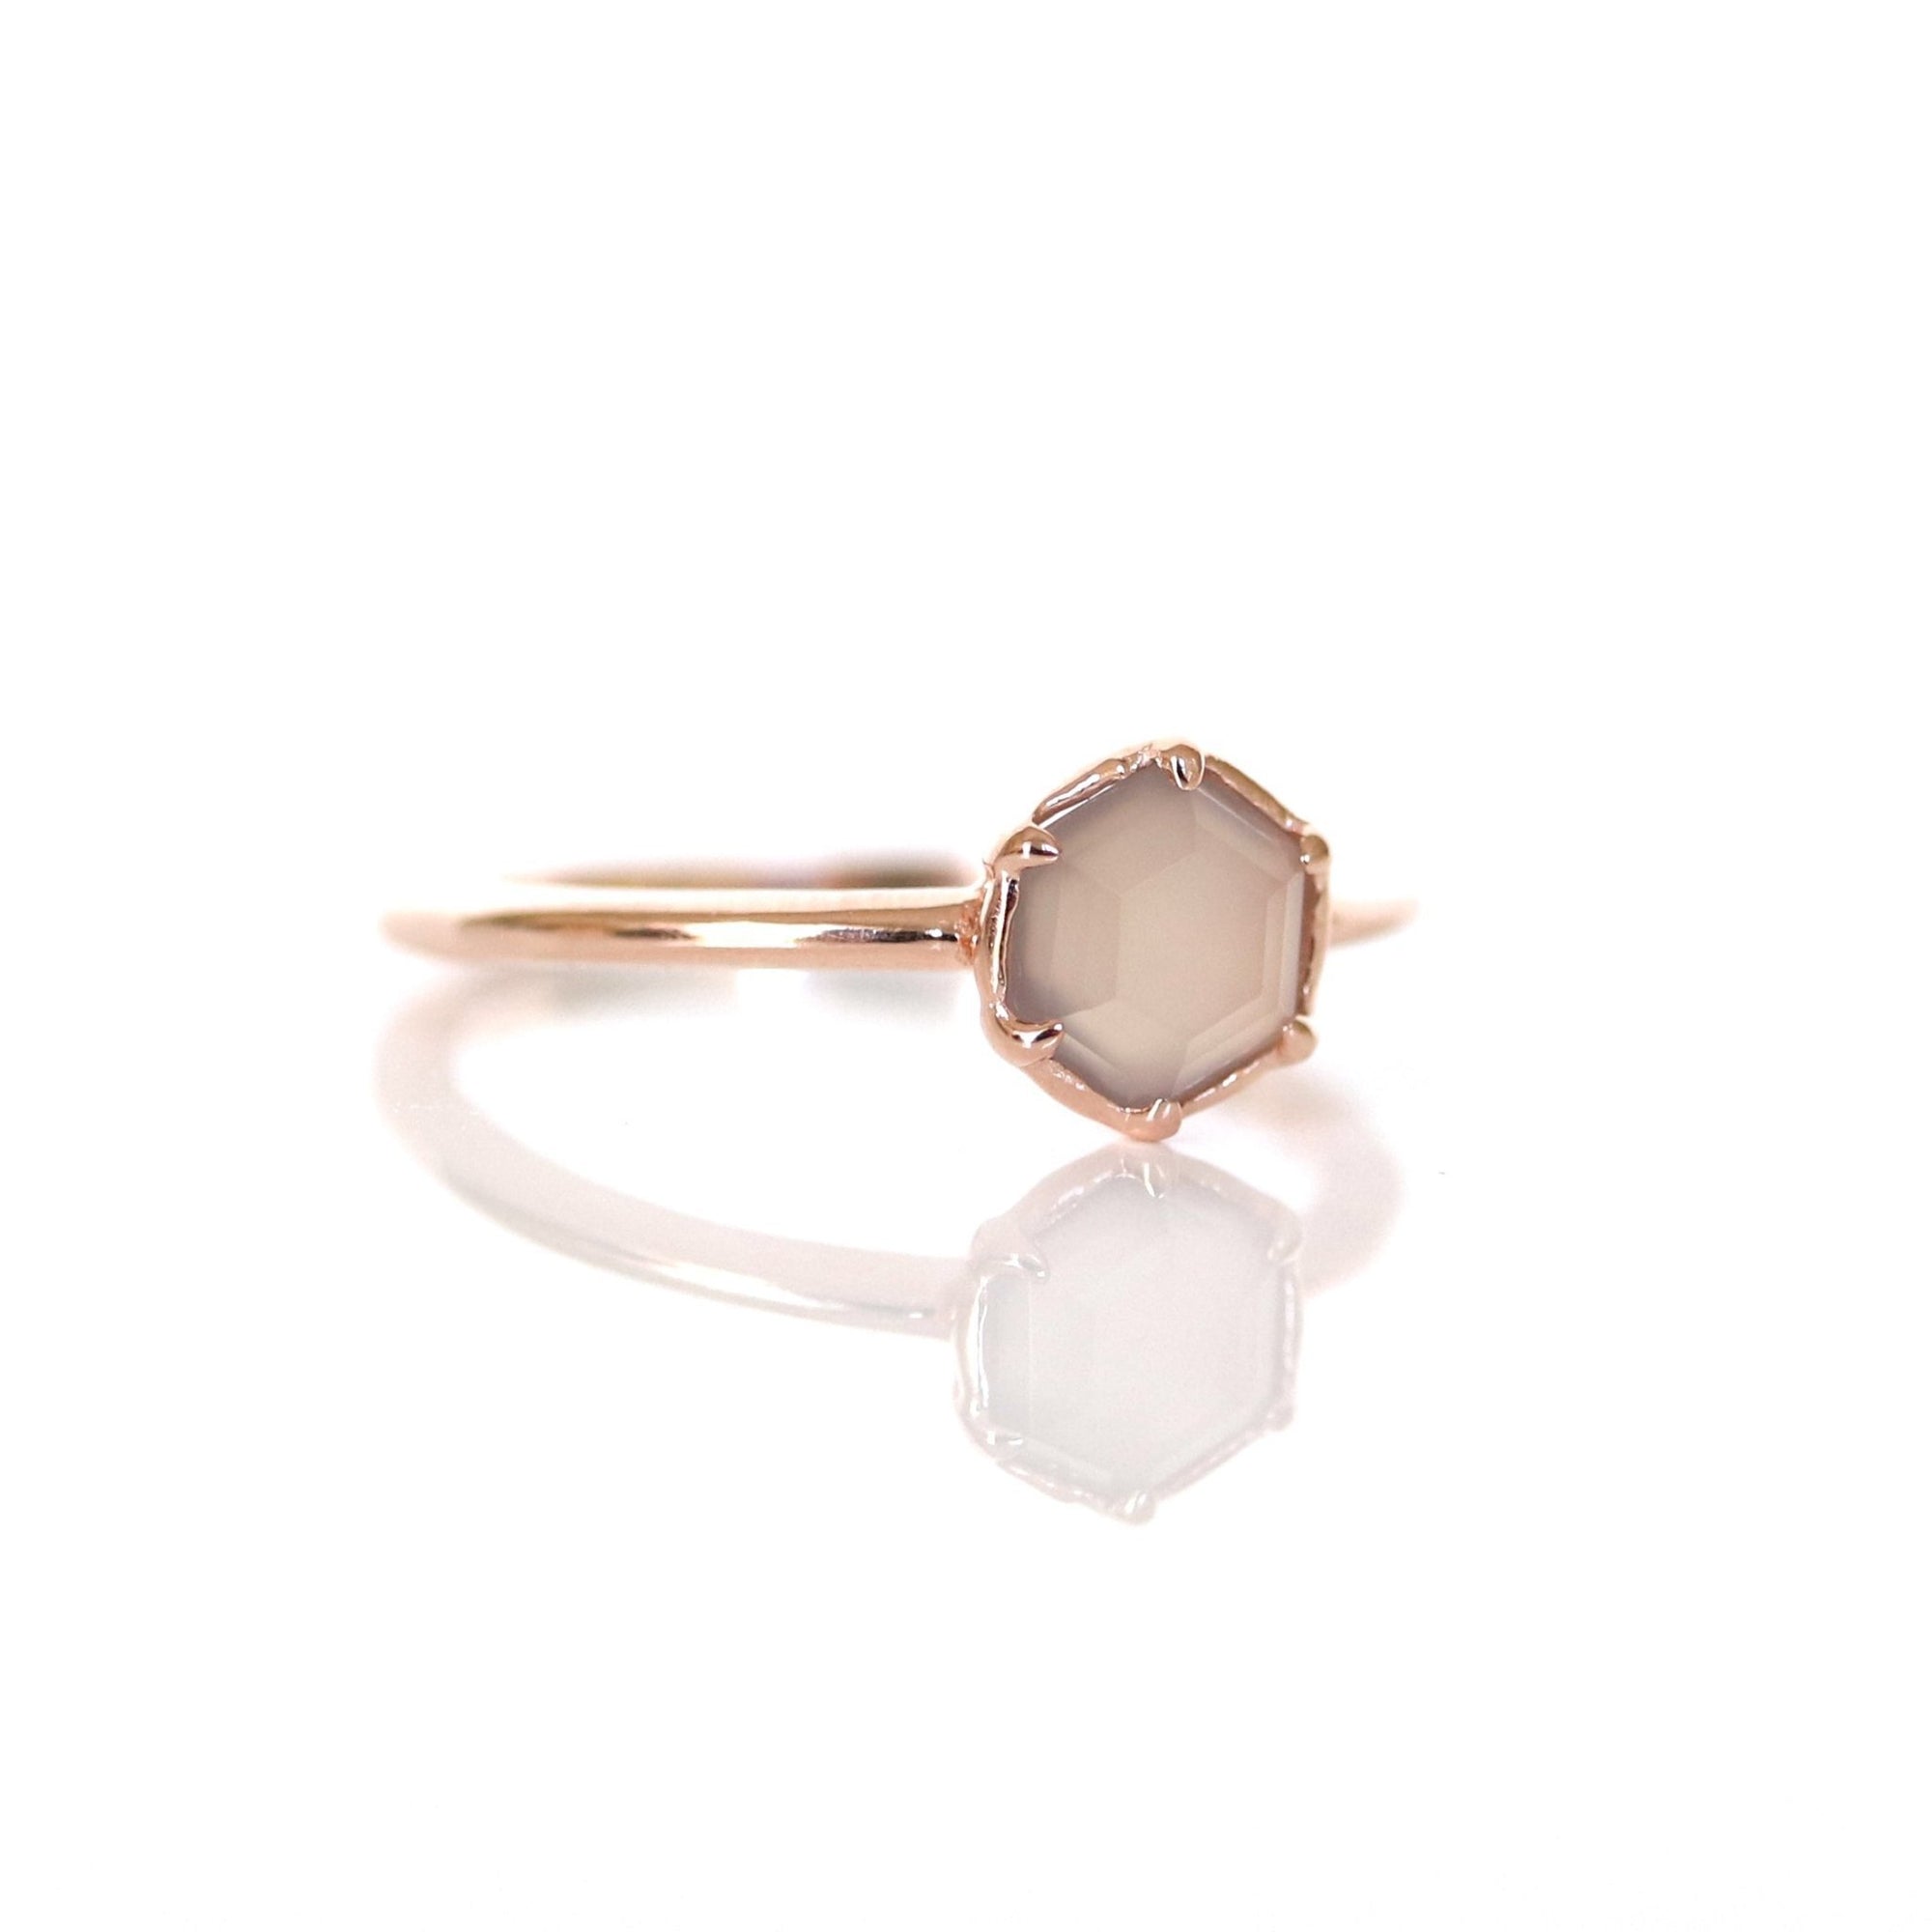 GRACE RING GREY MOONSTONE & ROSE GOLD - SO PRETTY CARA COTTER